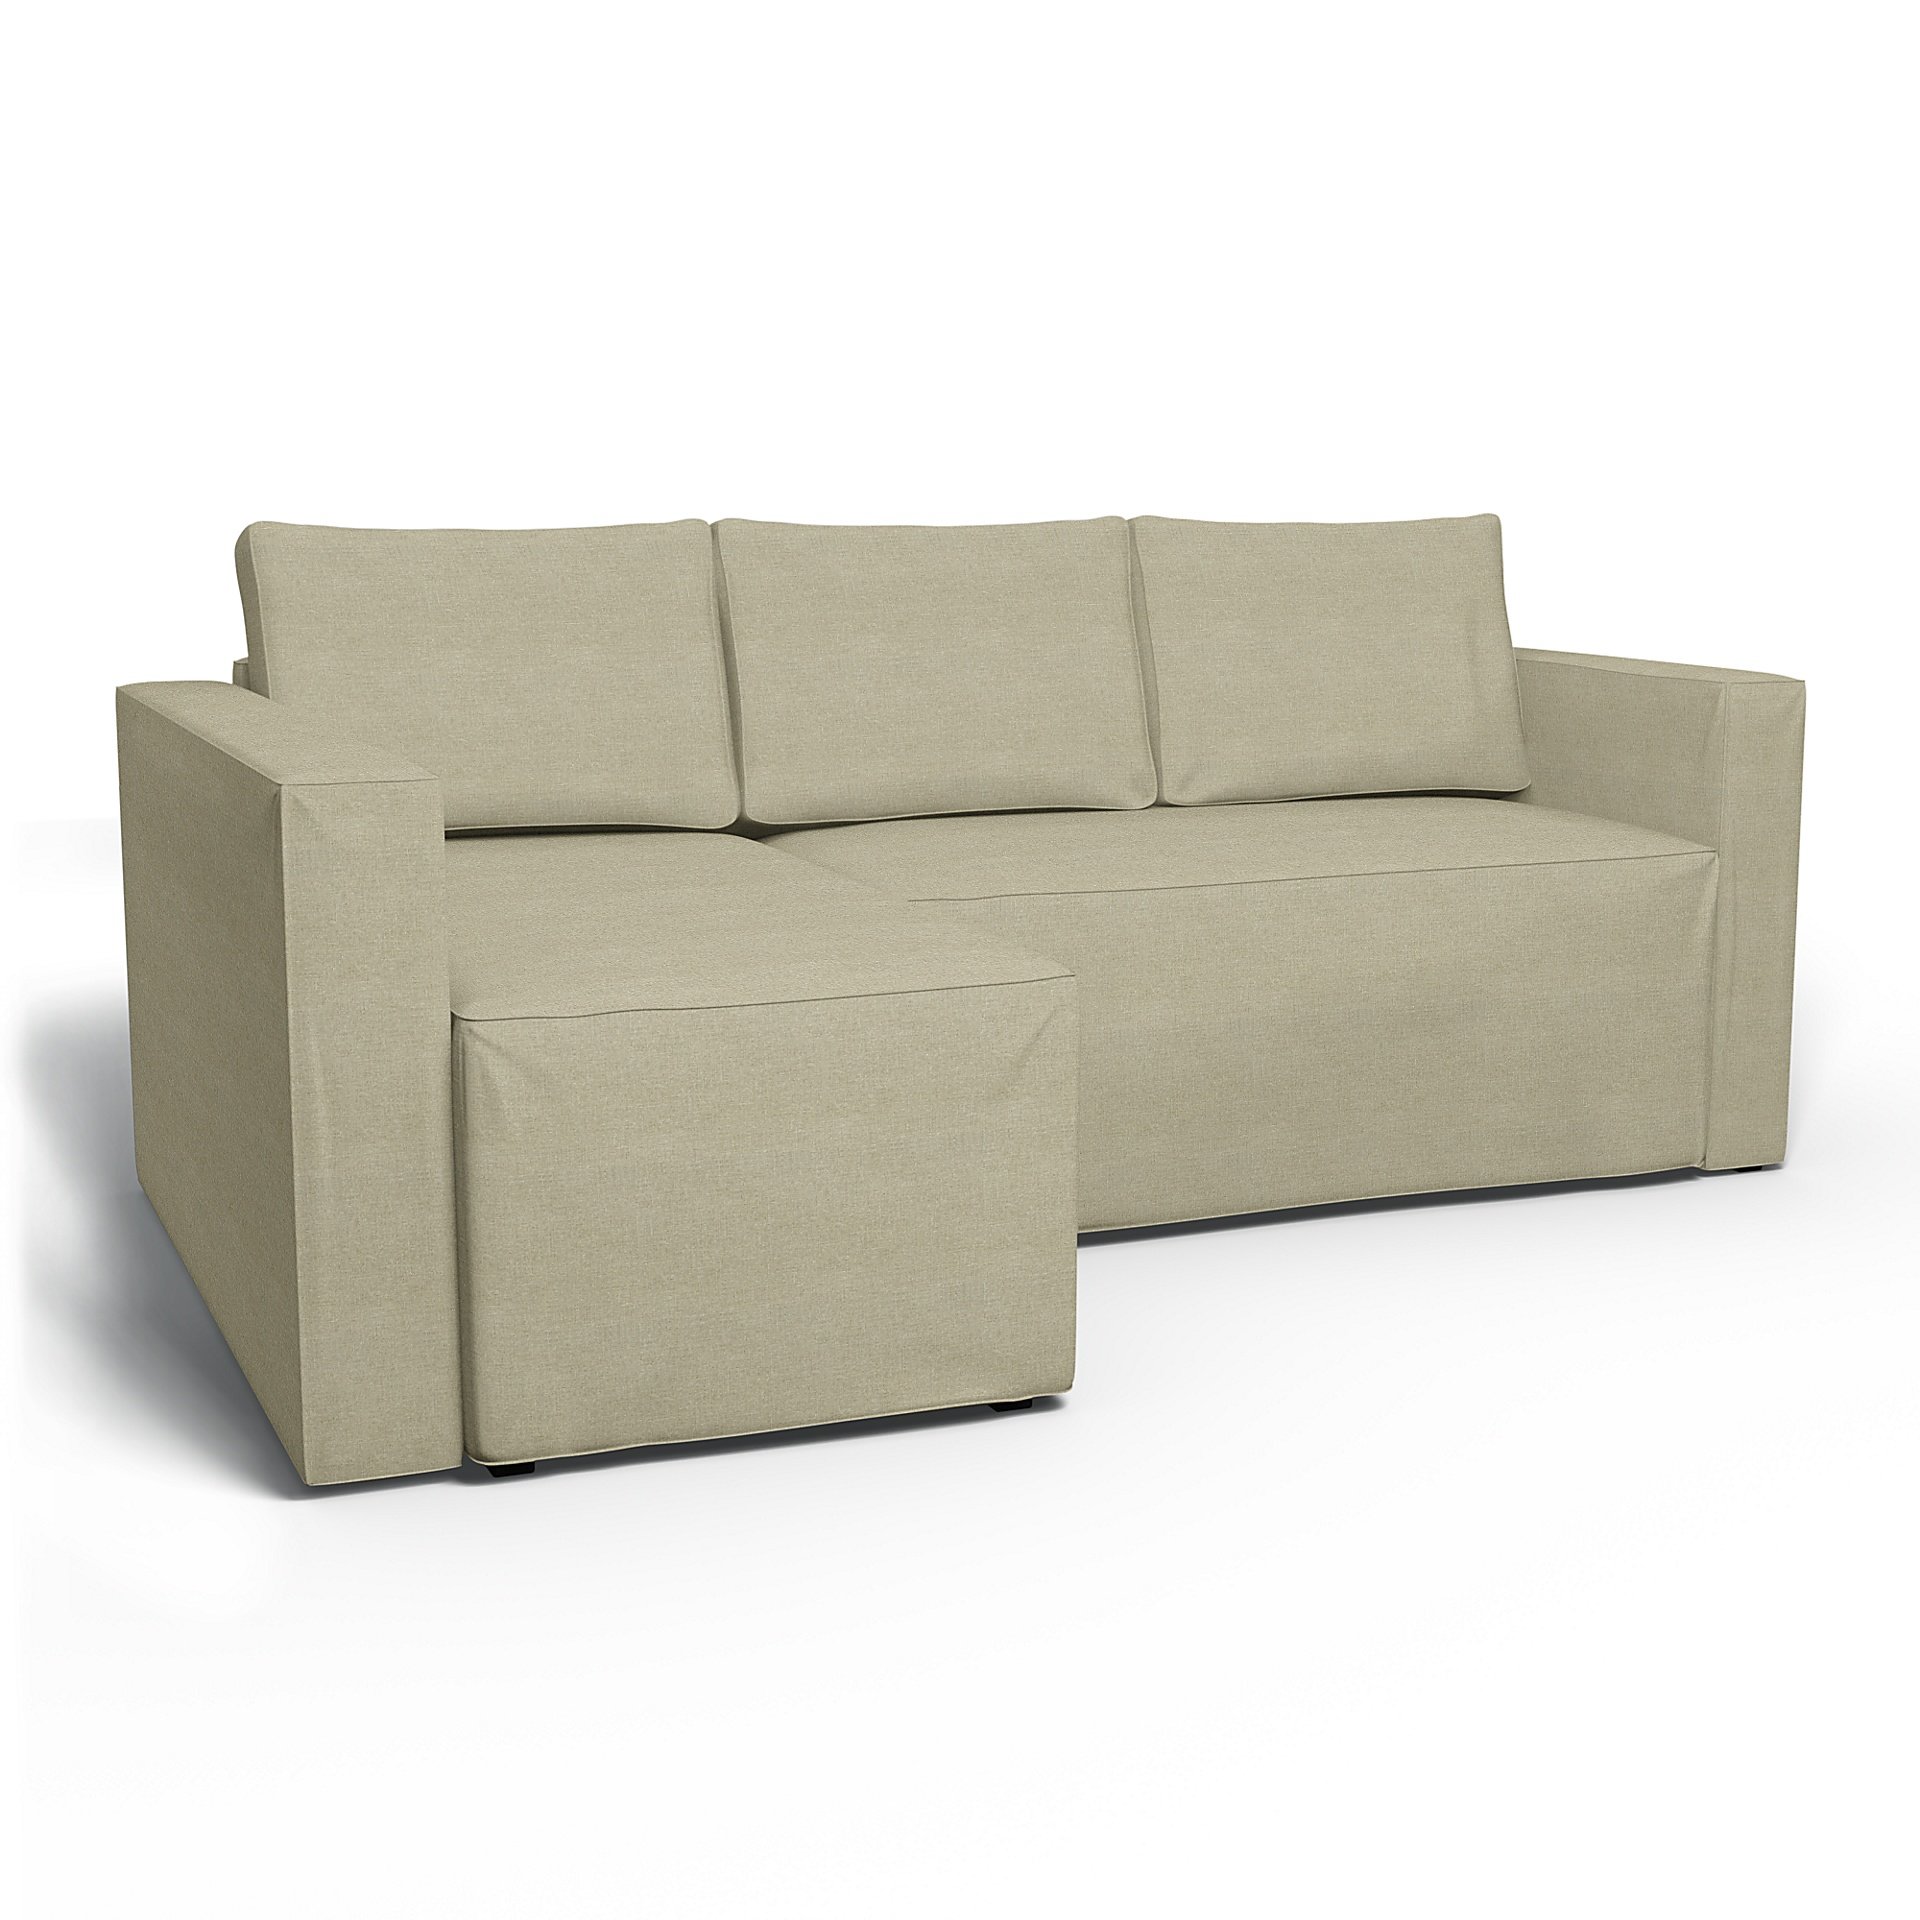 IKEA - Manstad Sofa Bed with Left Chaise Cover, Pebble, Linen - Bemz